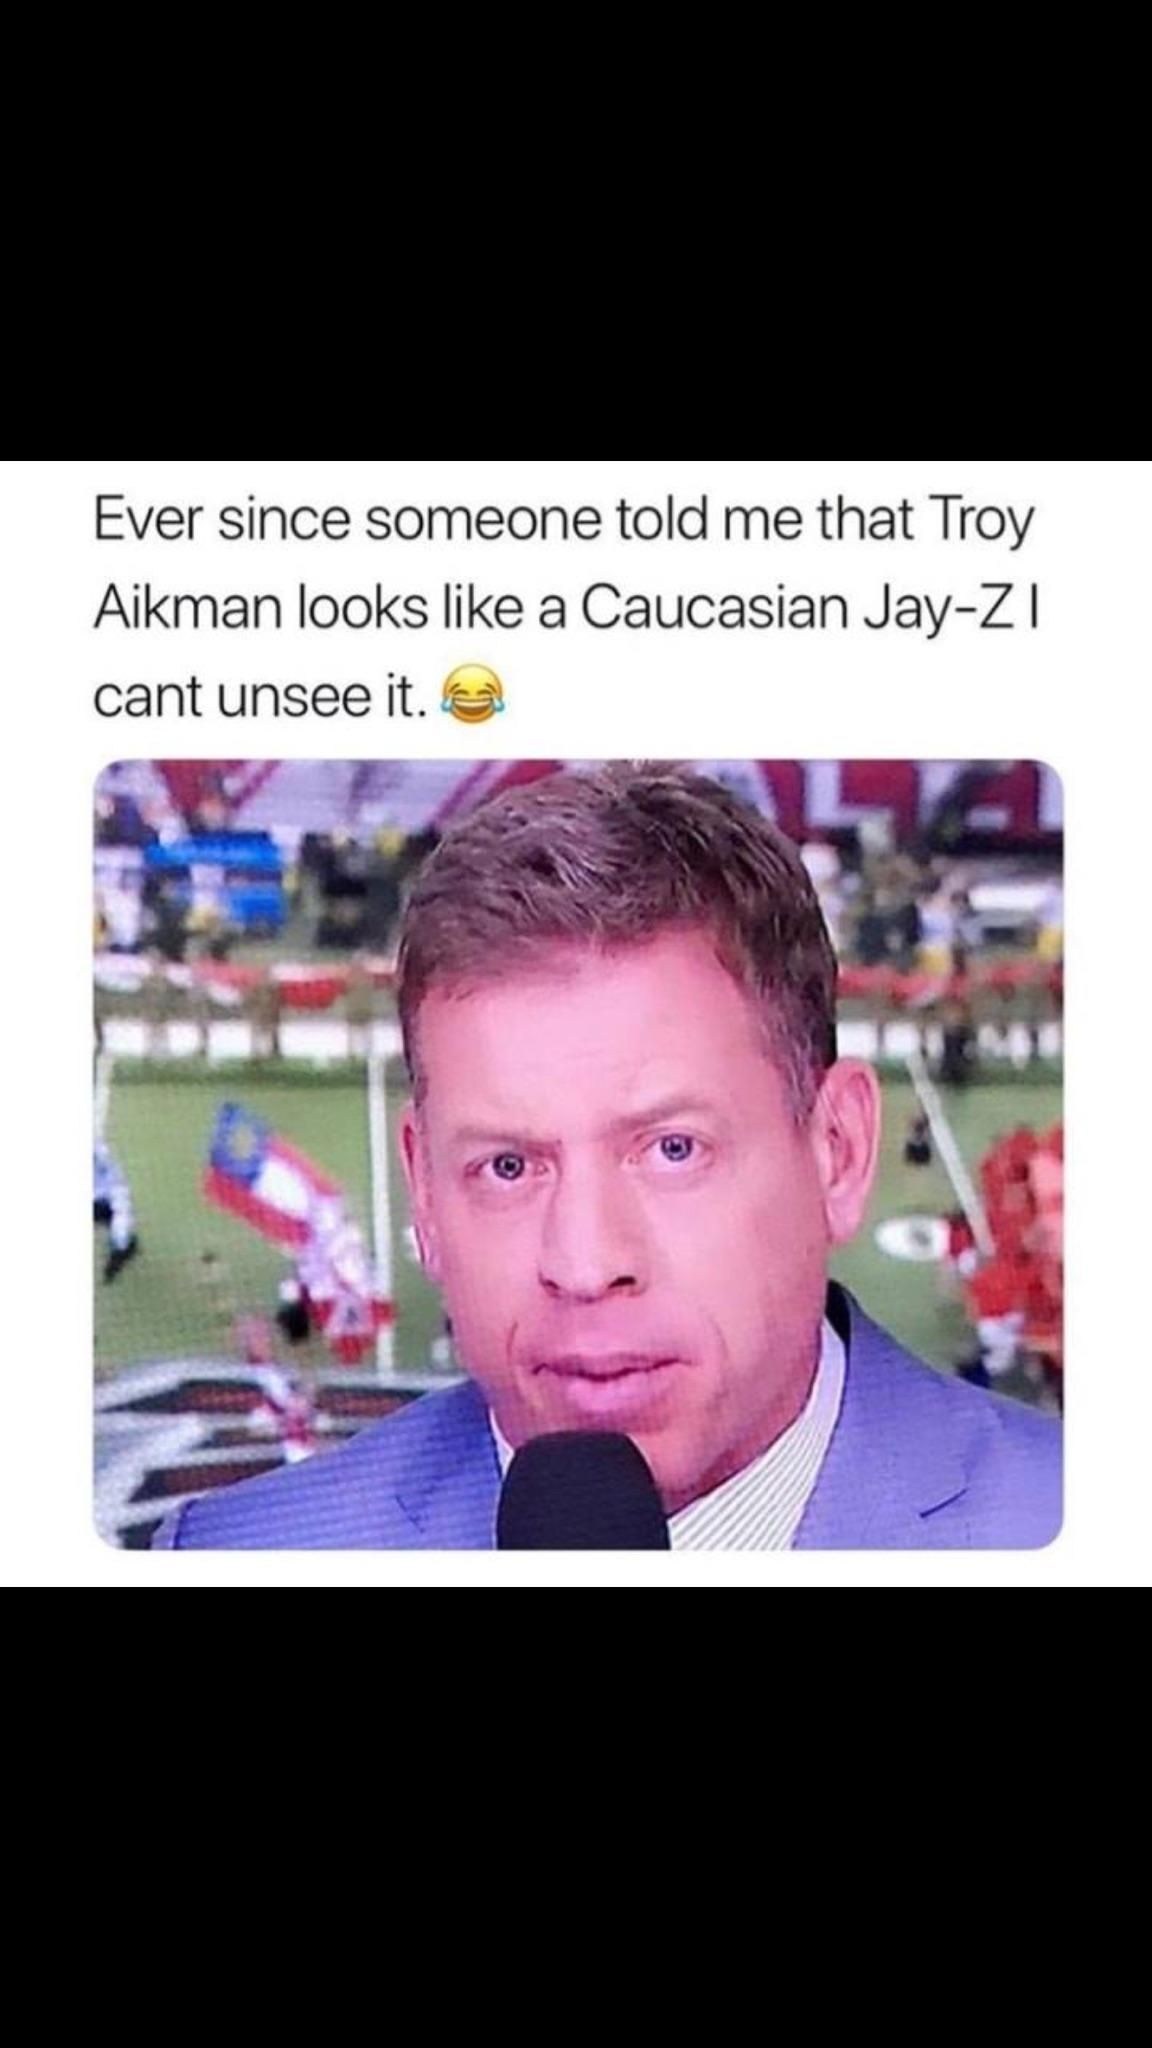 Aikman is the pale Hova.